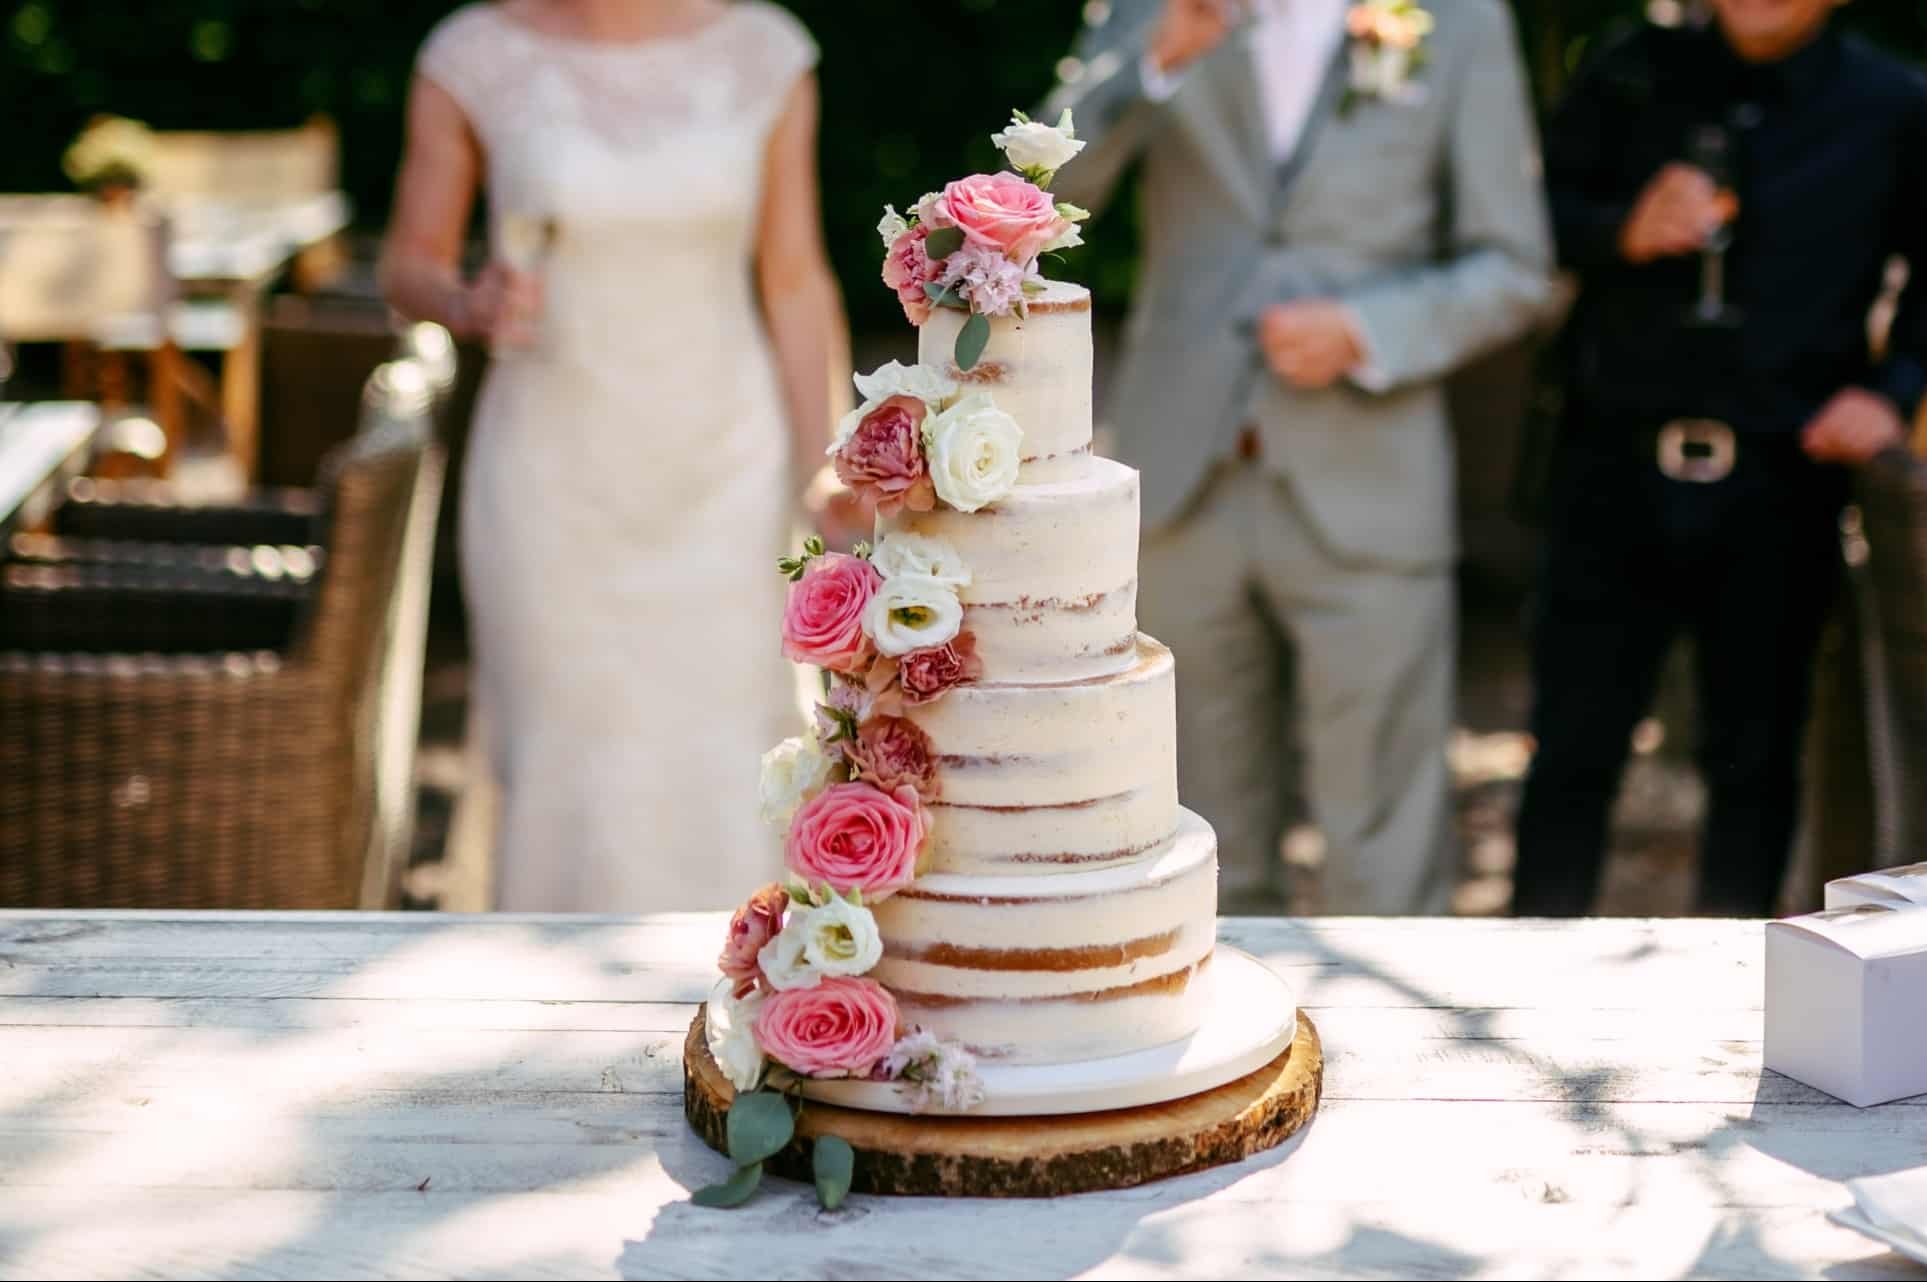 A wedding cake sitting on a wooden table.